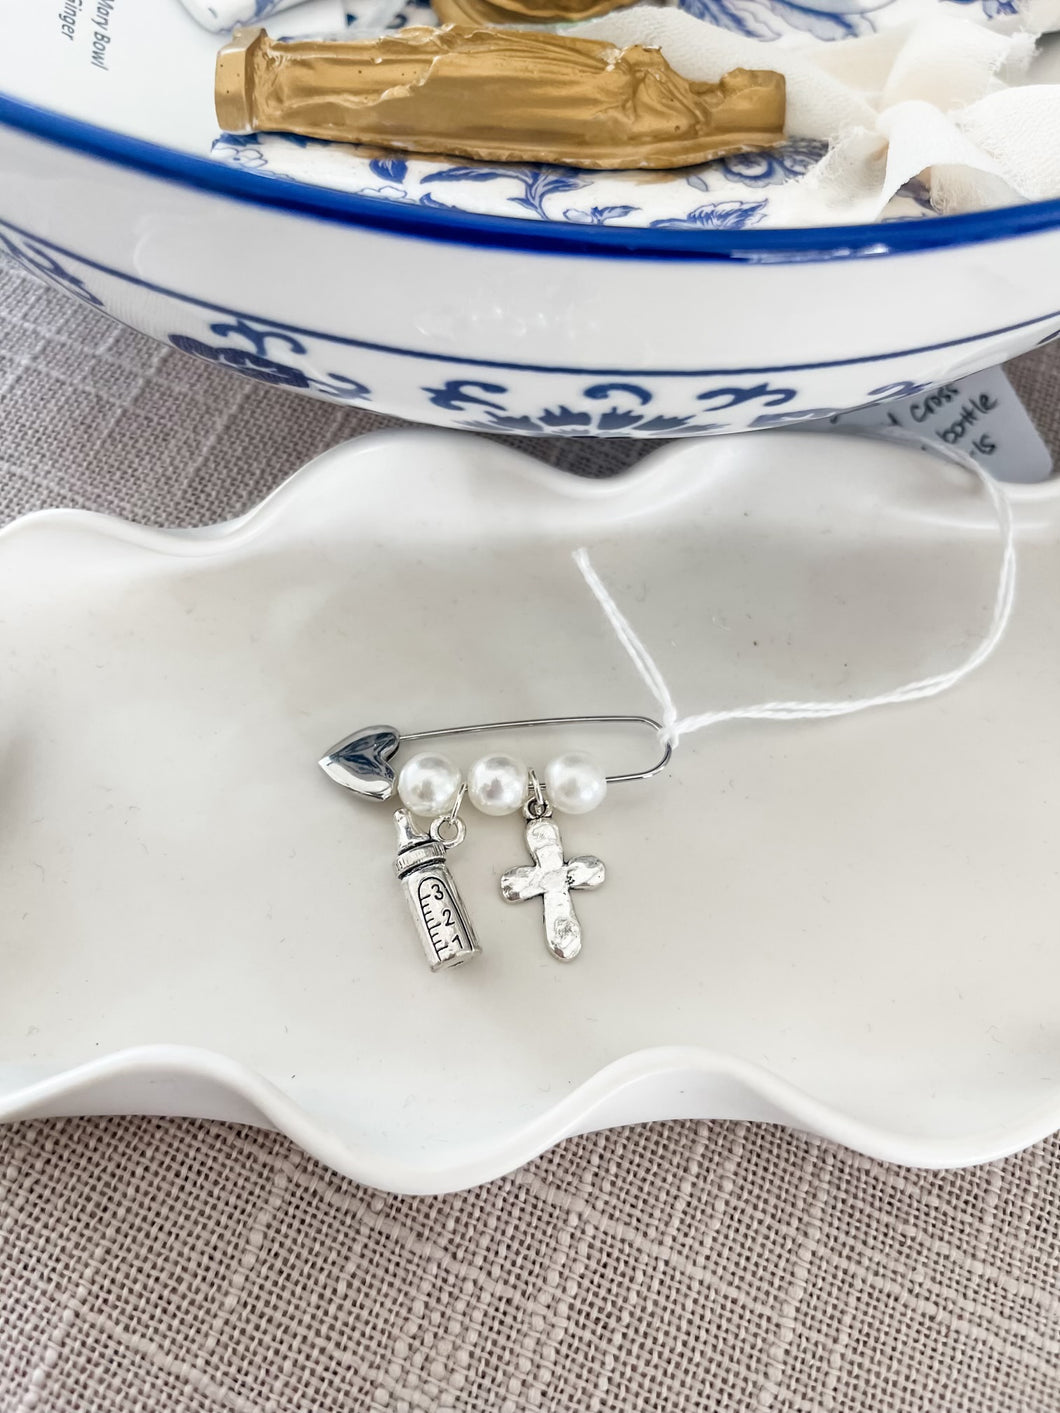 Silver heart pin with cross, baby bottle and pearls- The Gilded Mosquito by Lisa Leger